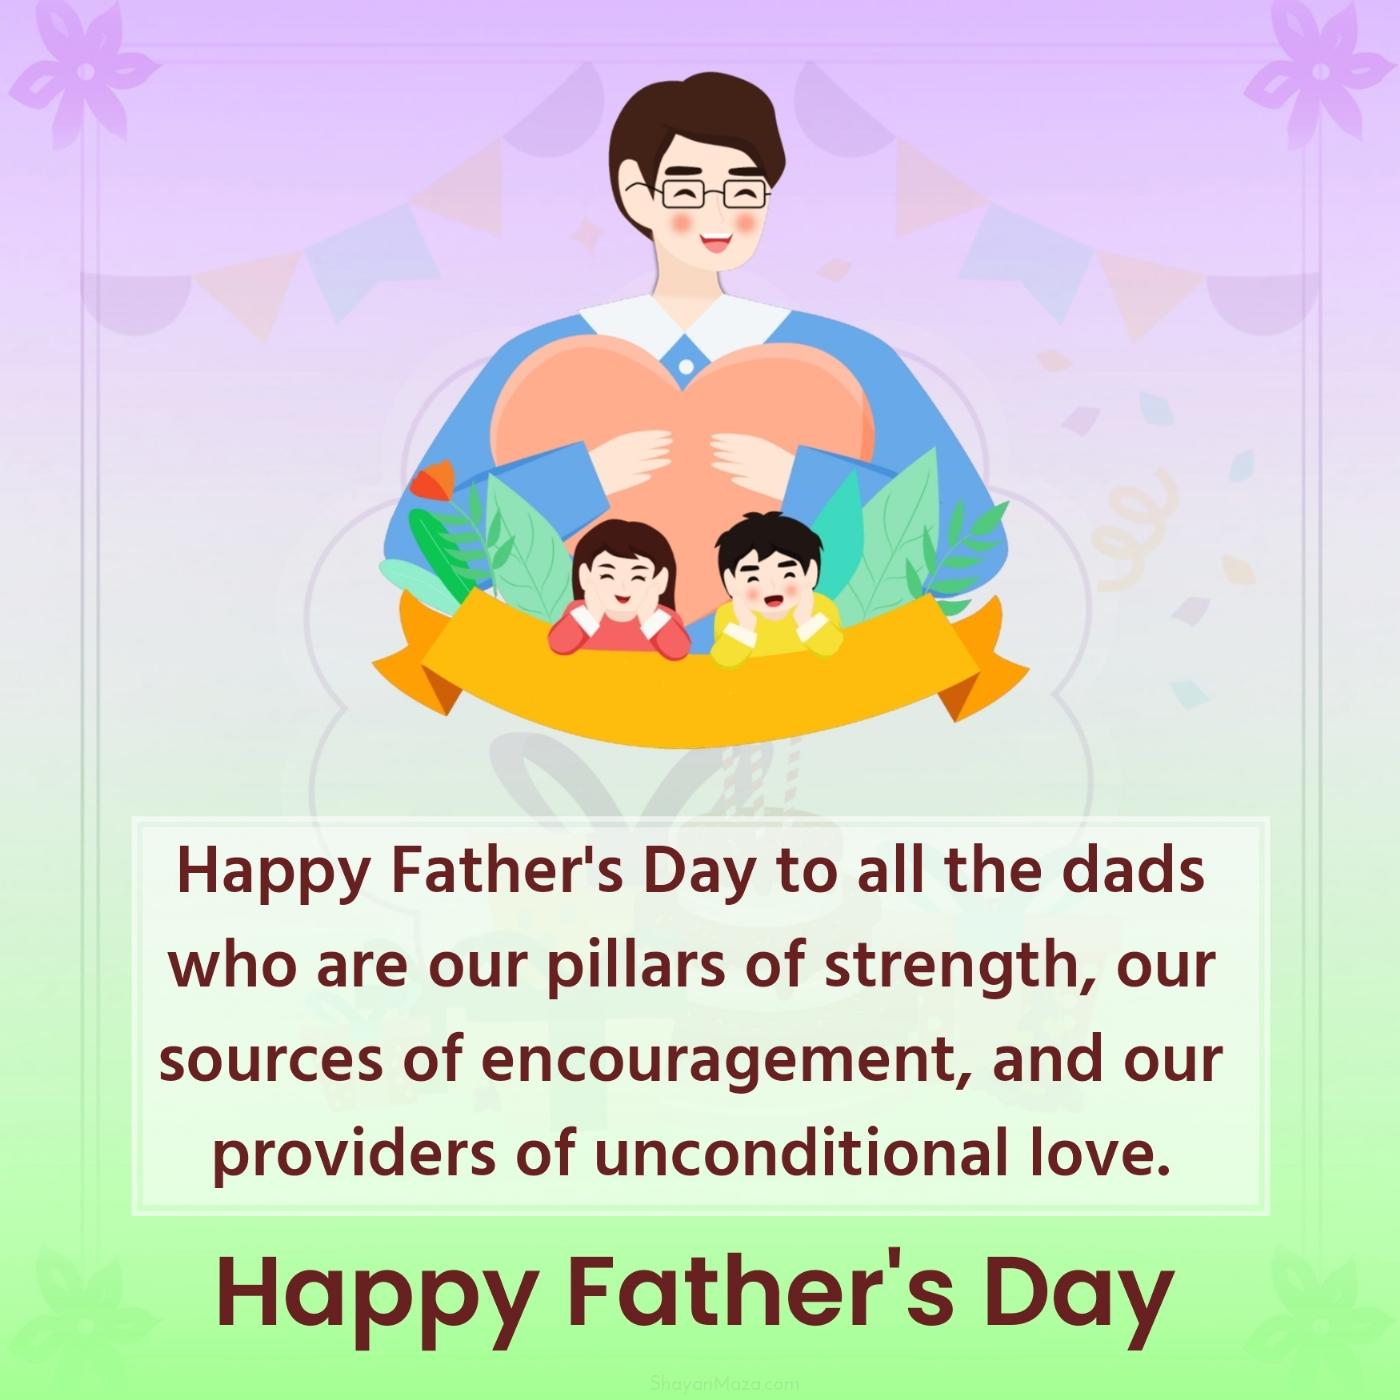 Happy Father's Day to all the dads who are our pillars of strength